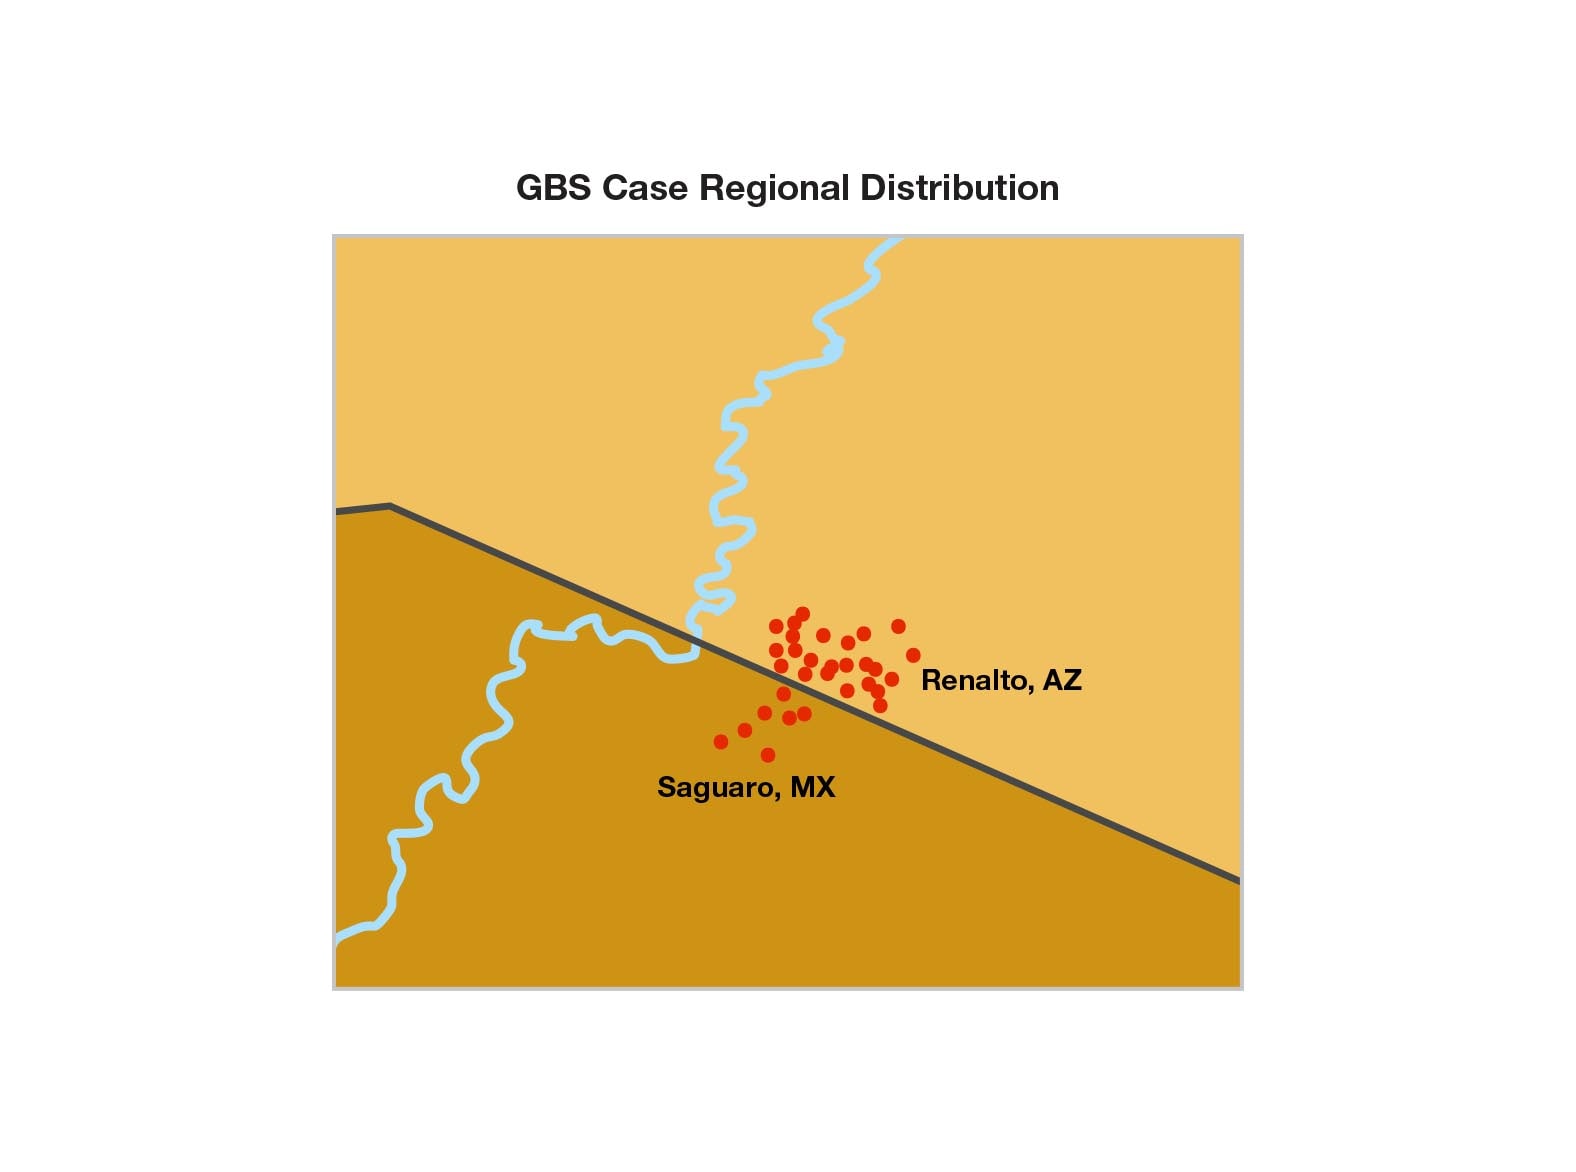 Map showing 24 cases of GBS in Renalto, Arizona and seven cases on Saguaro, Mexico